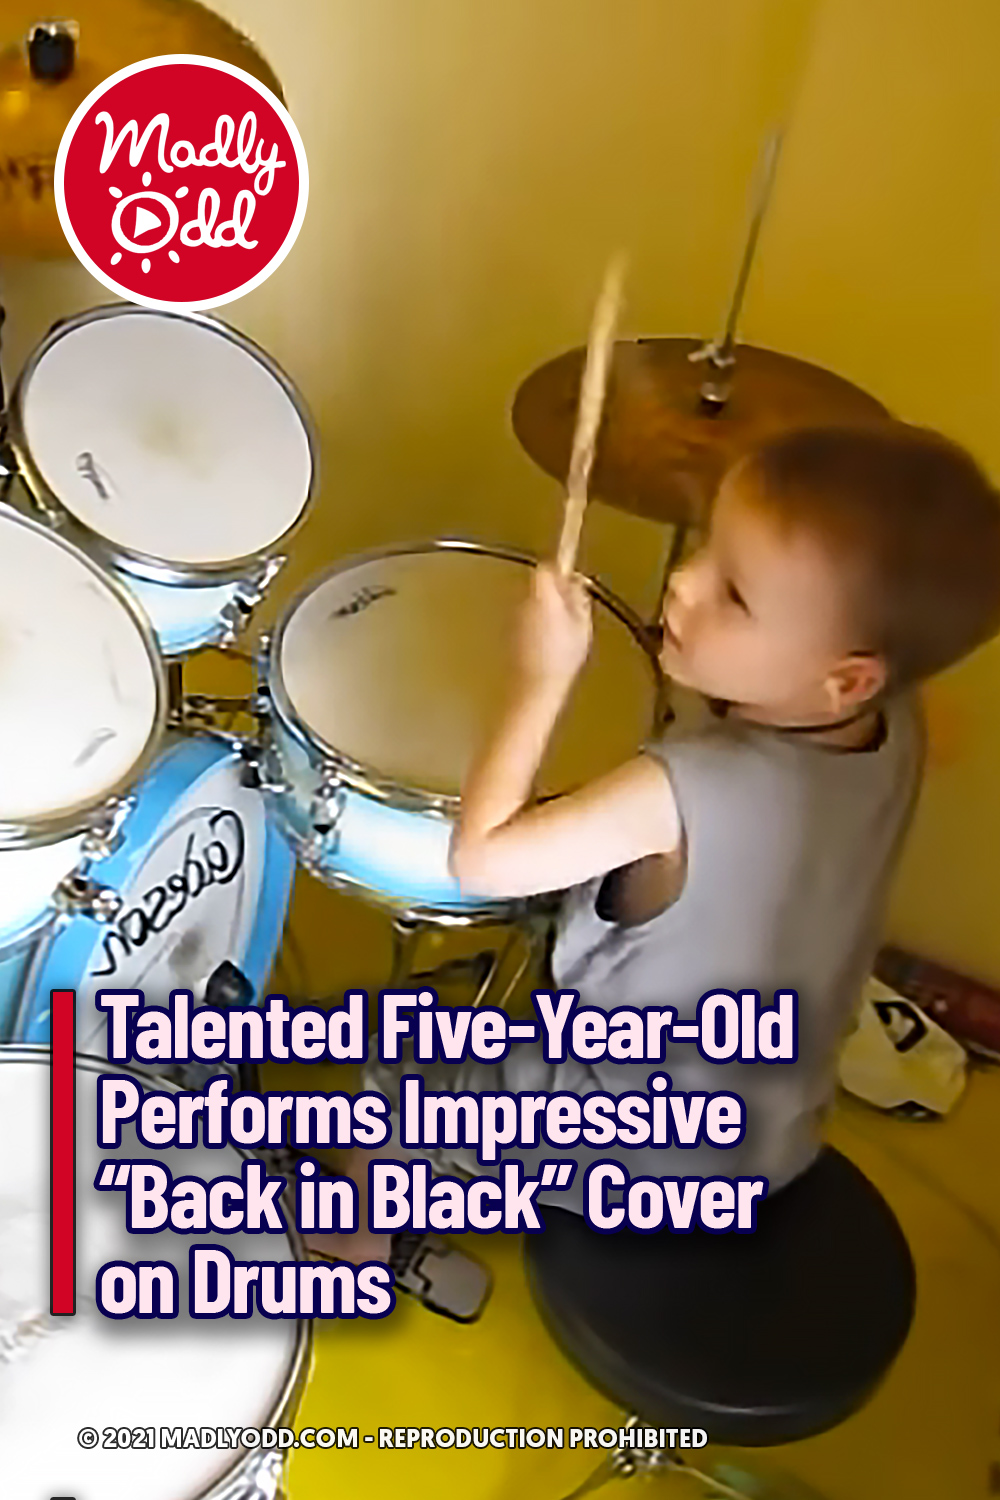 Talented Five-Year-Old Performs Impressive “Back in Black” Cover on Drums